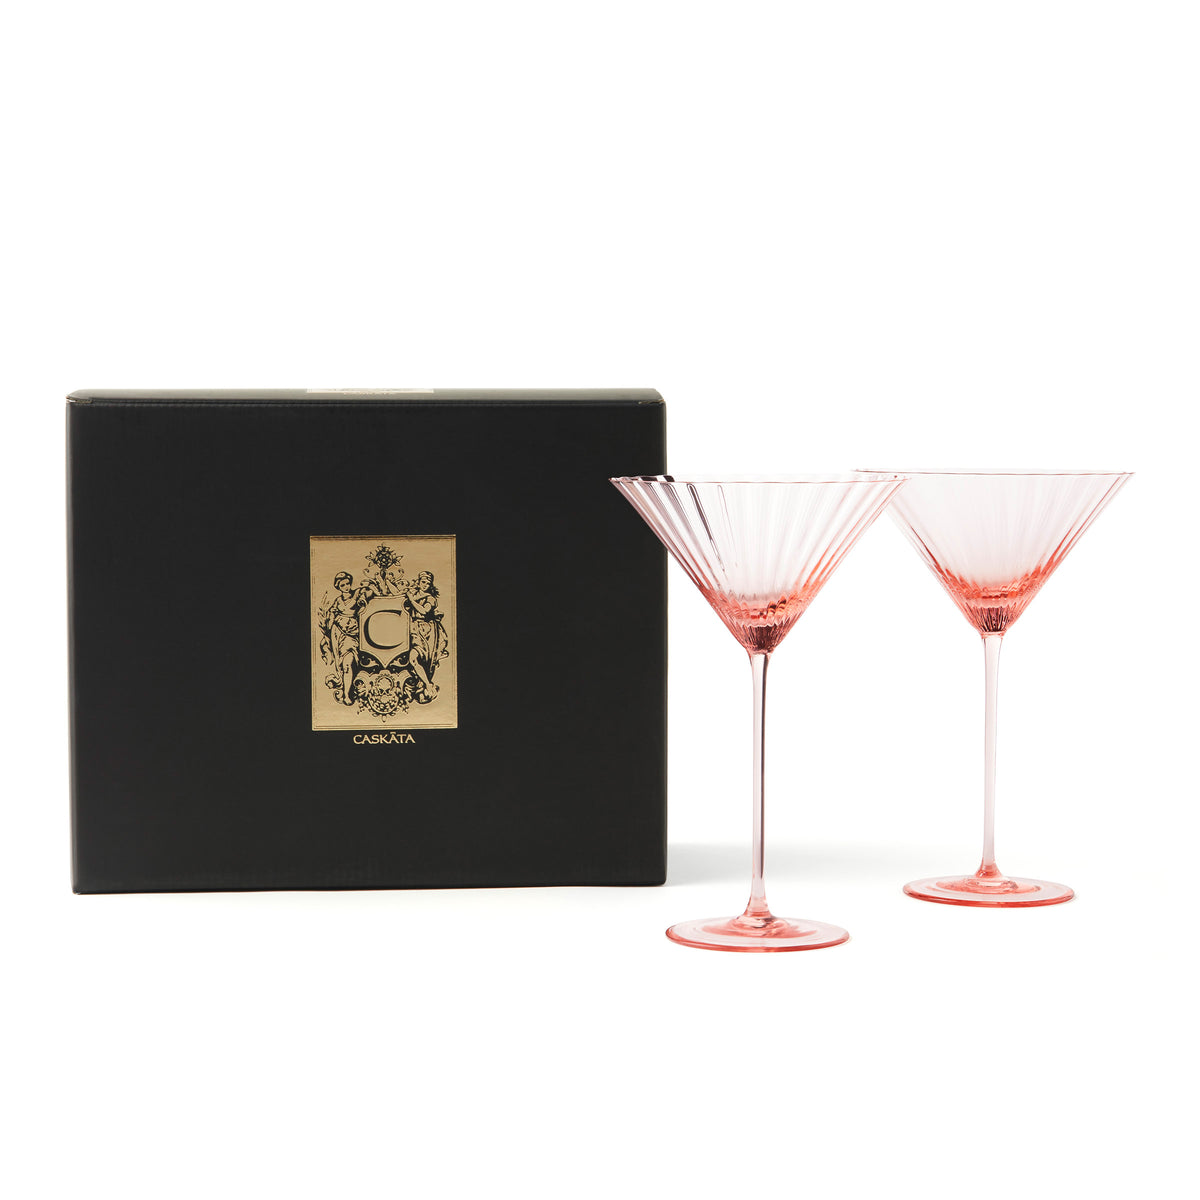 Quinn rose pink mouth-blown crystal martini glasses from Caskata.